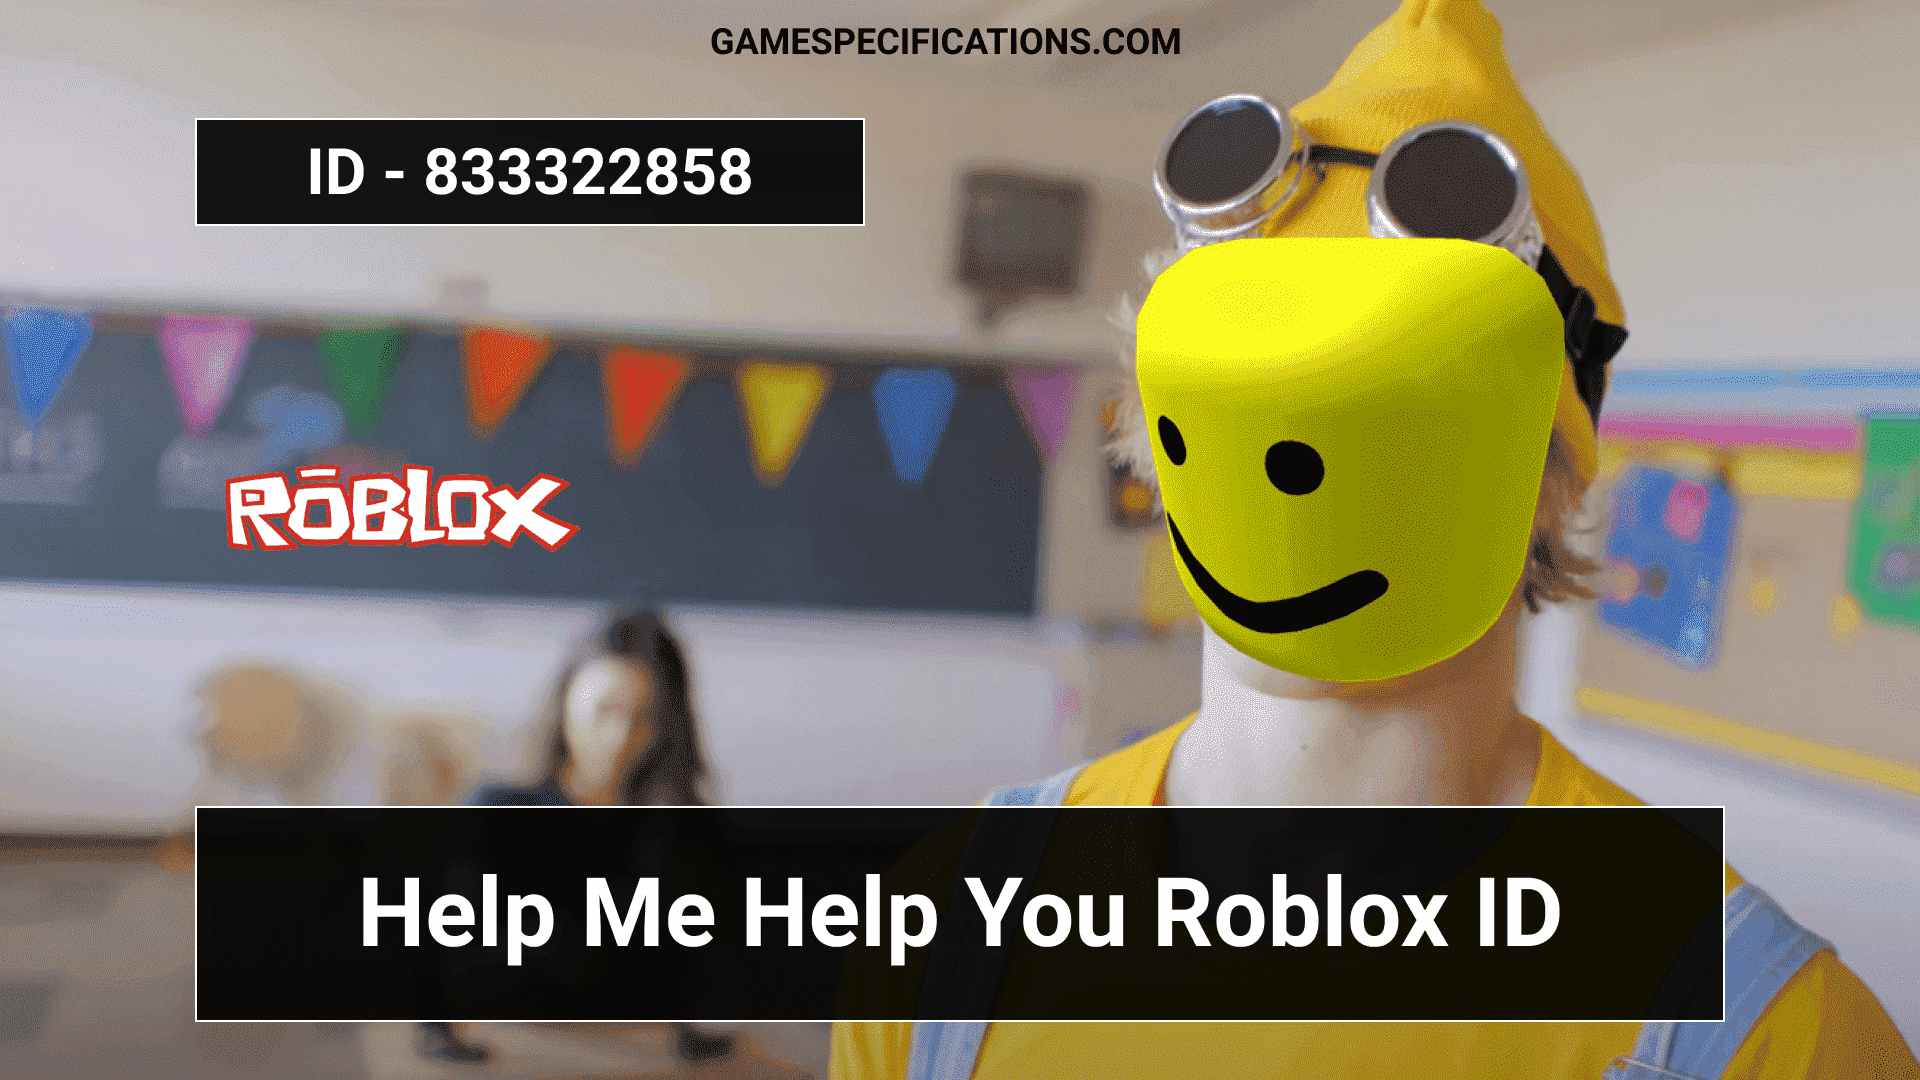 25 Help Me Help You Roblox Id Codes To Brighten Your Day Game Specifications - logan paul music codes roblox id